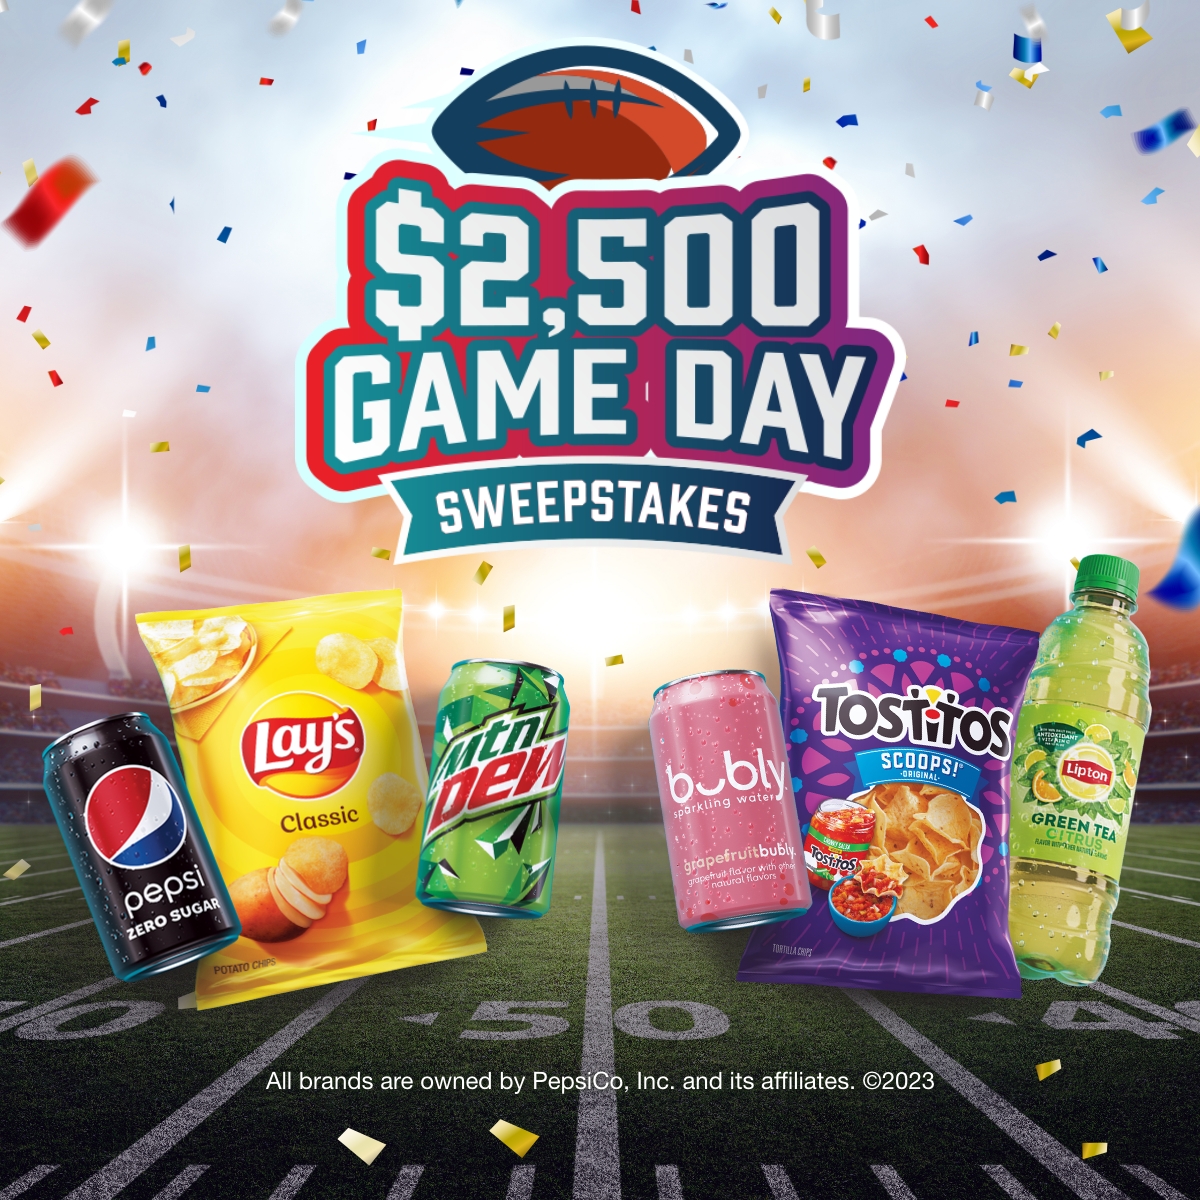 $2,500 Game Day Sweepstakes